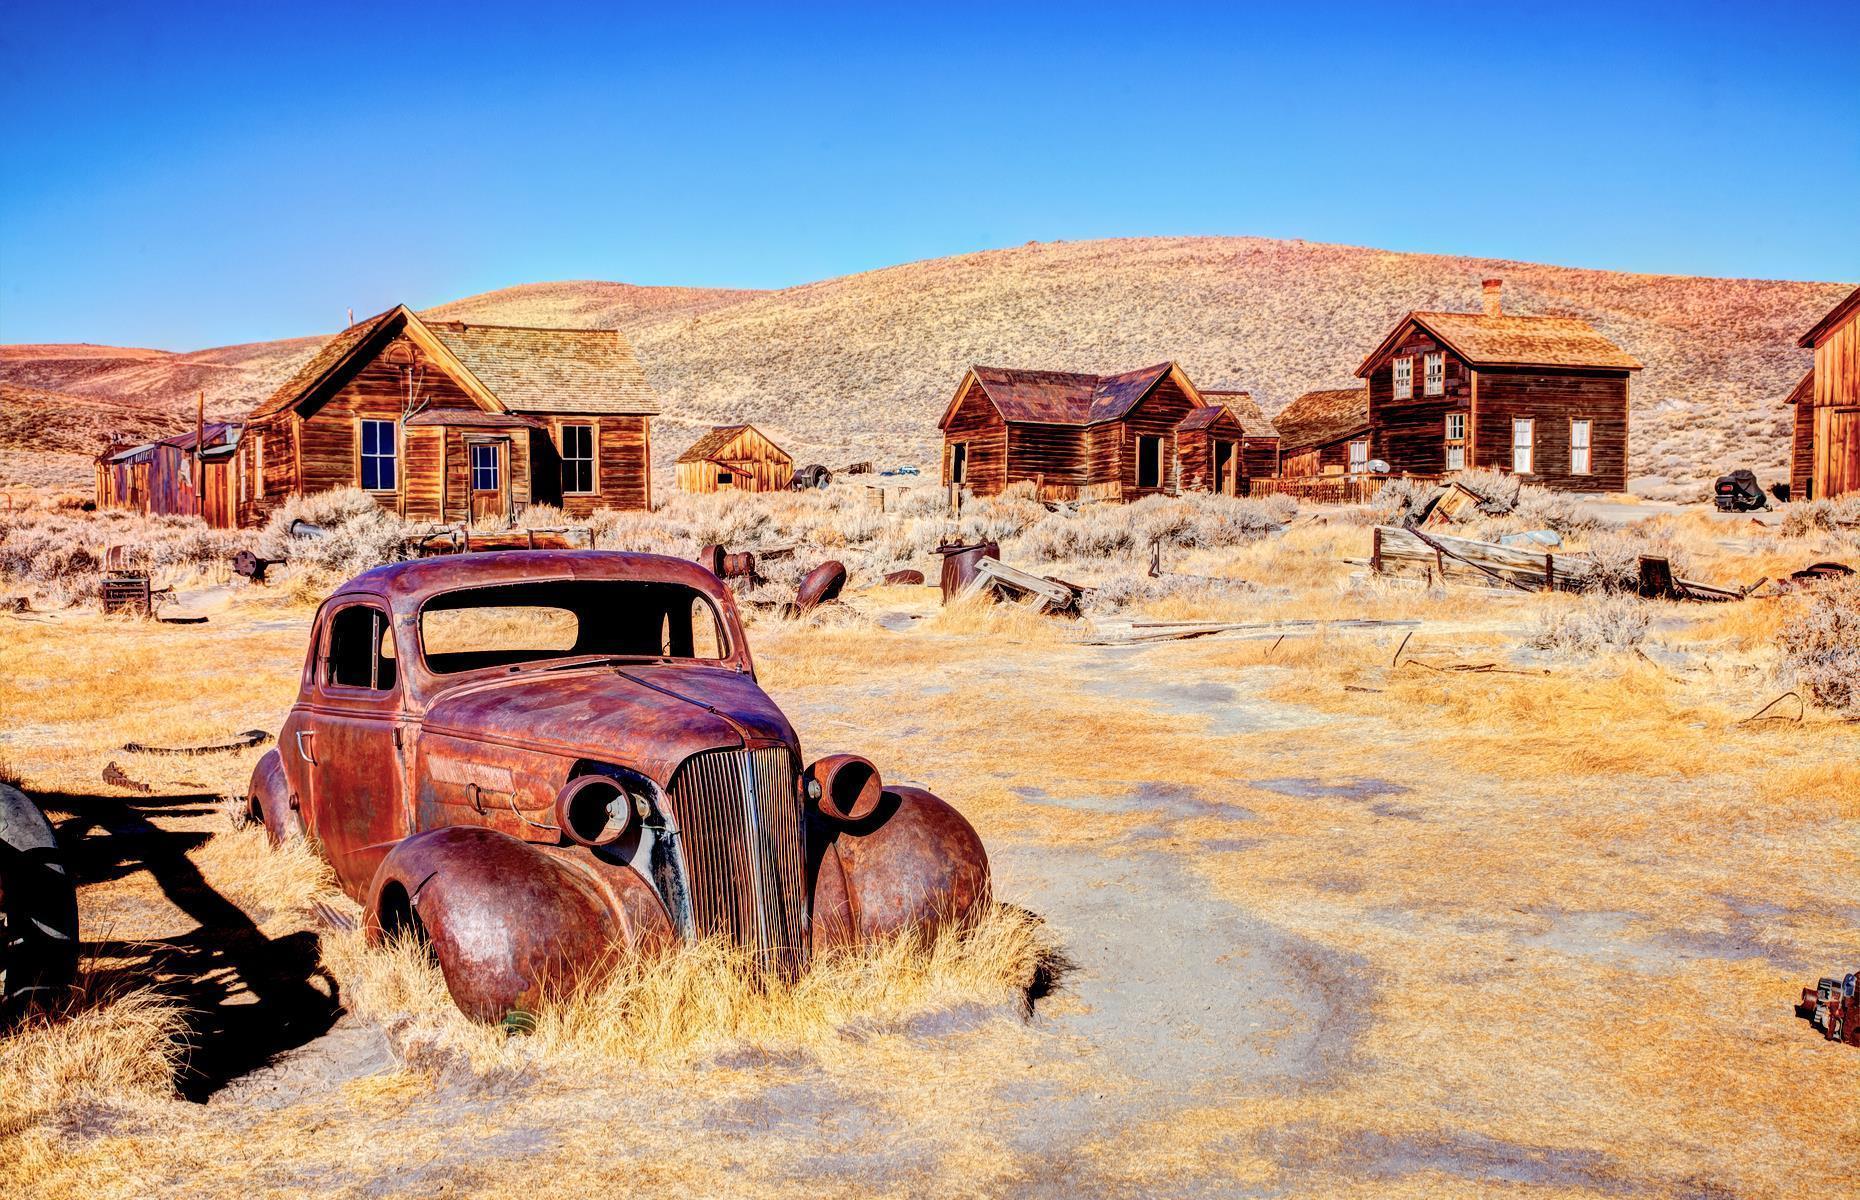 <p>The bones of <a href="https://www.parks.ca.gov/?page_id=509">Bodie</a>, a gold-mining town that thrived in the late 19th century, are scattered across the desert. In its heyday, the town was home to some 10,000 people and, though residents spilled out when gold resources dwindled, legend has it that Bodie was never entirely abandoned. Today it's a ghost town by name and by nature, with reports of haunting faces appearing at windows and of cooking smells hanging in the air.</p>